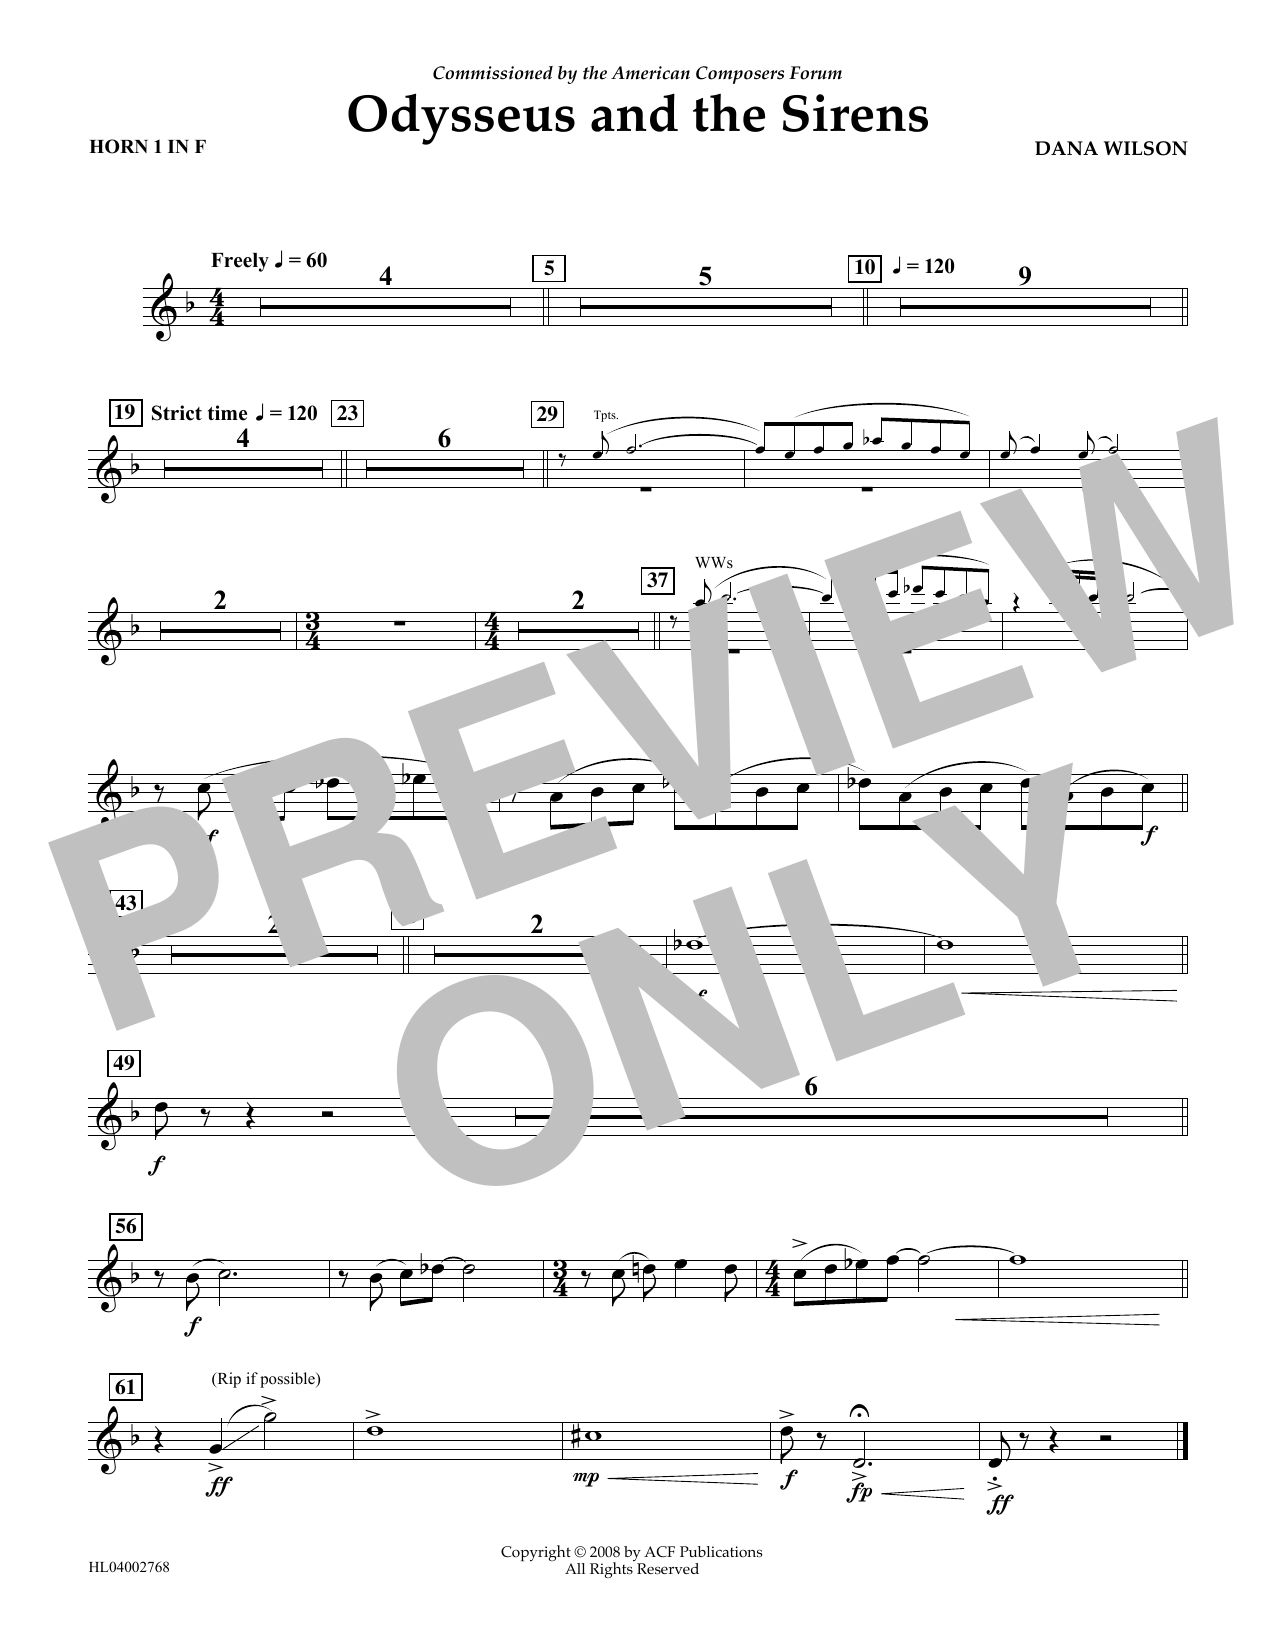 Download Dana Wilson Odysseus and the Sirens - F Horn 1 Sheet Music